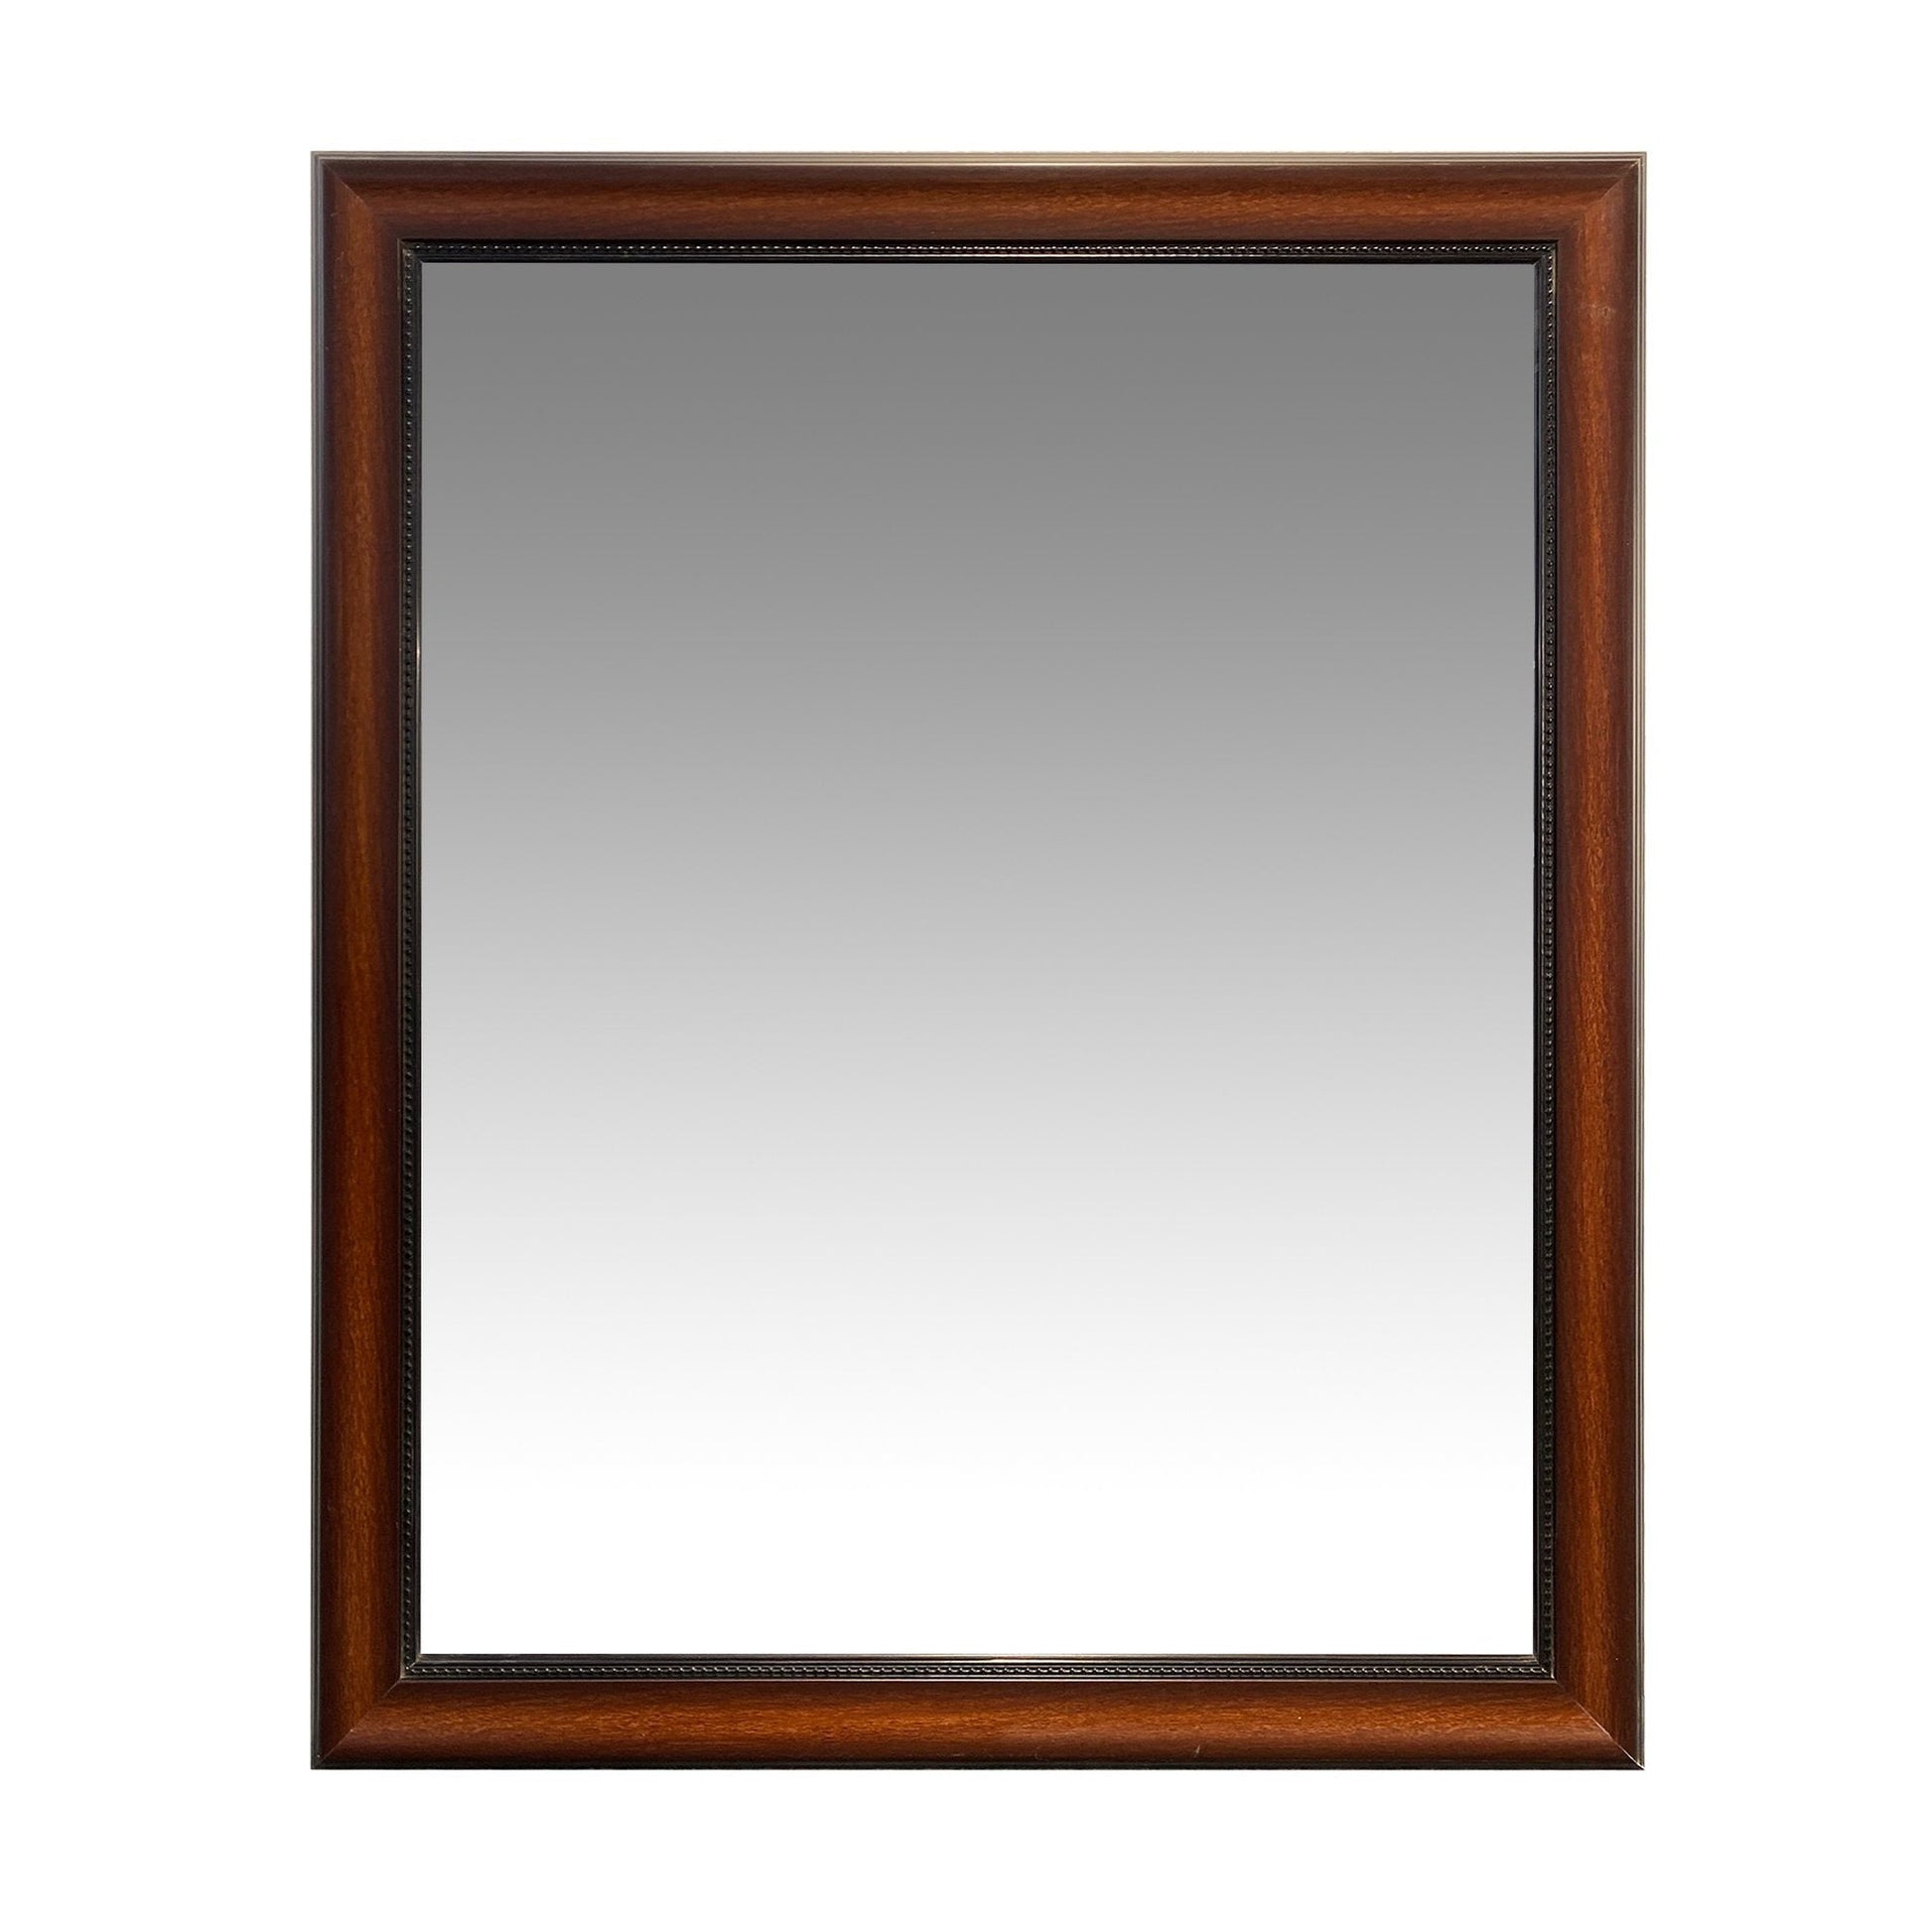 Benzara 34" Cherry Brown Molded Polystyrene Framed Wall Mirror With Beaded Details